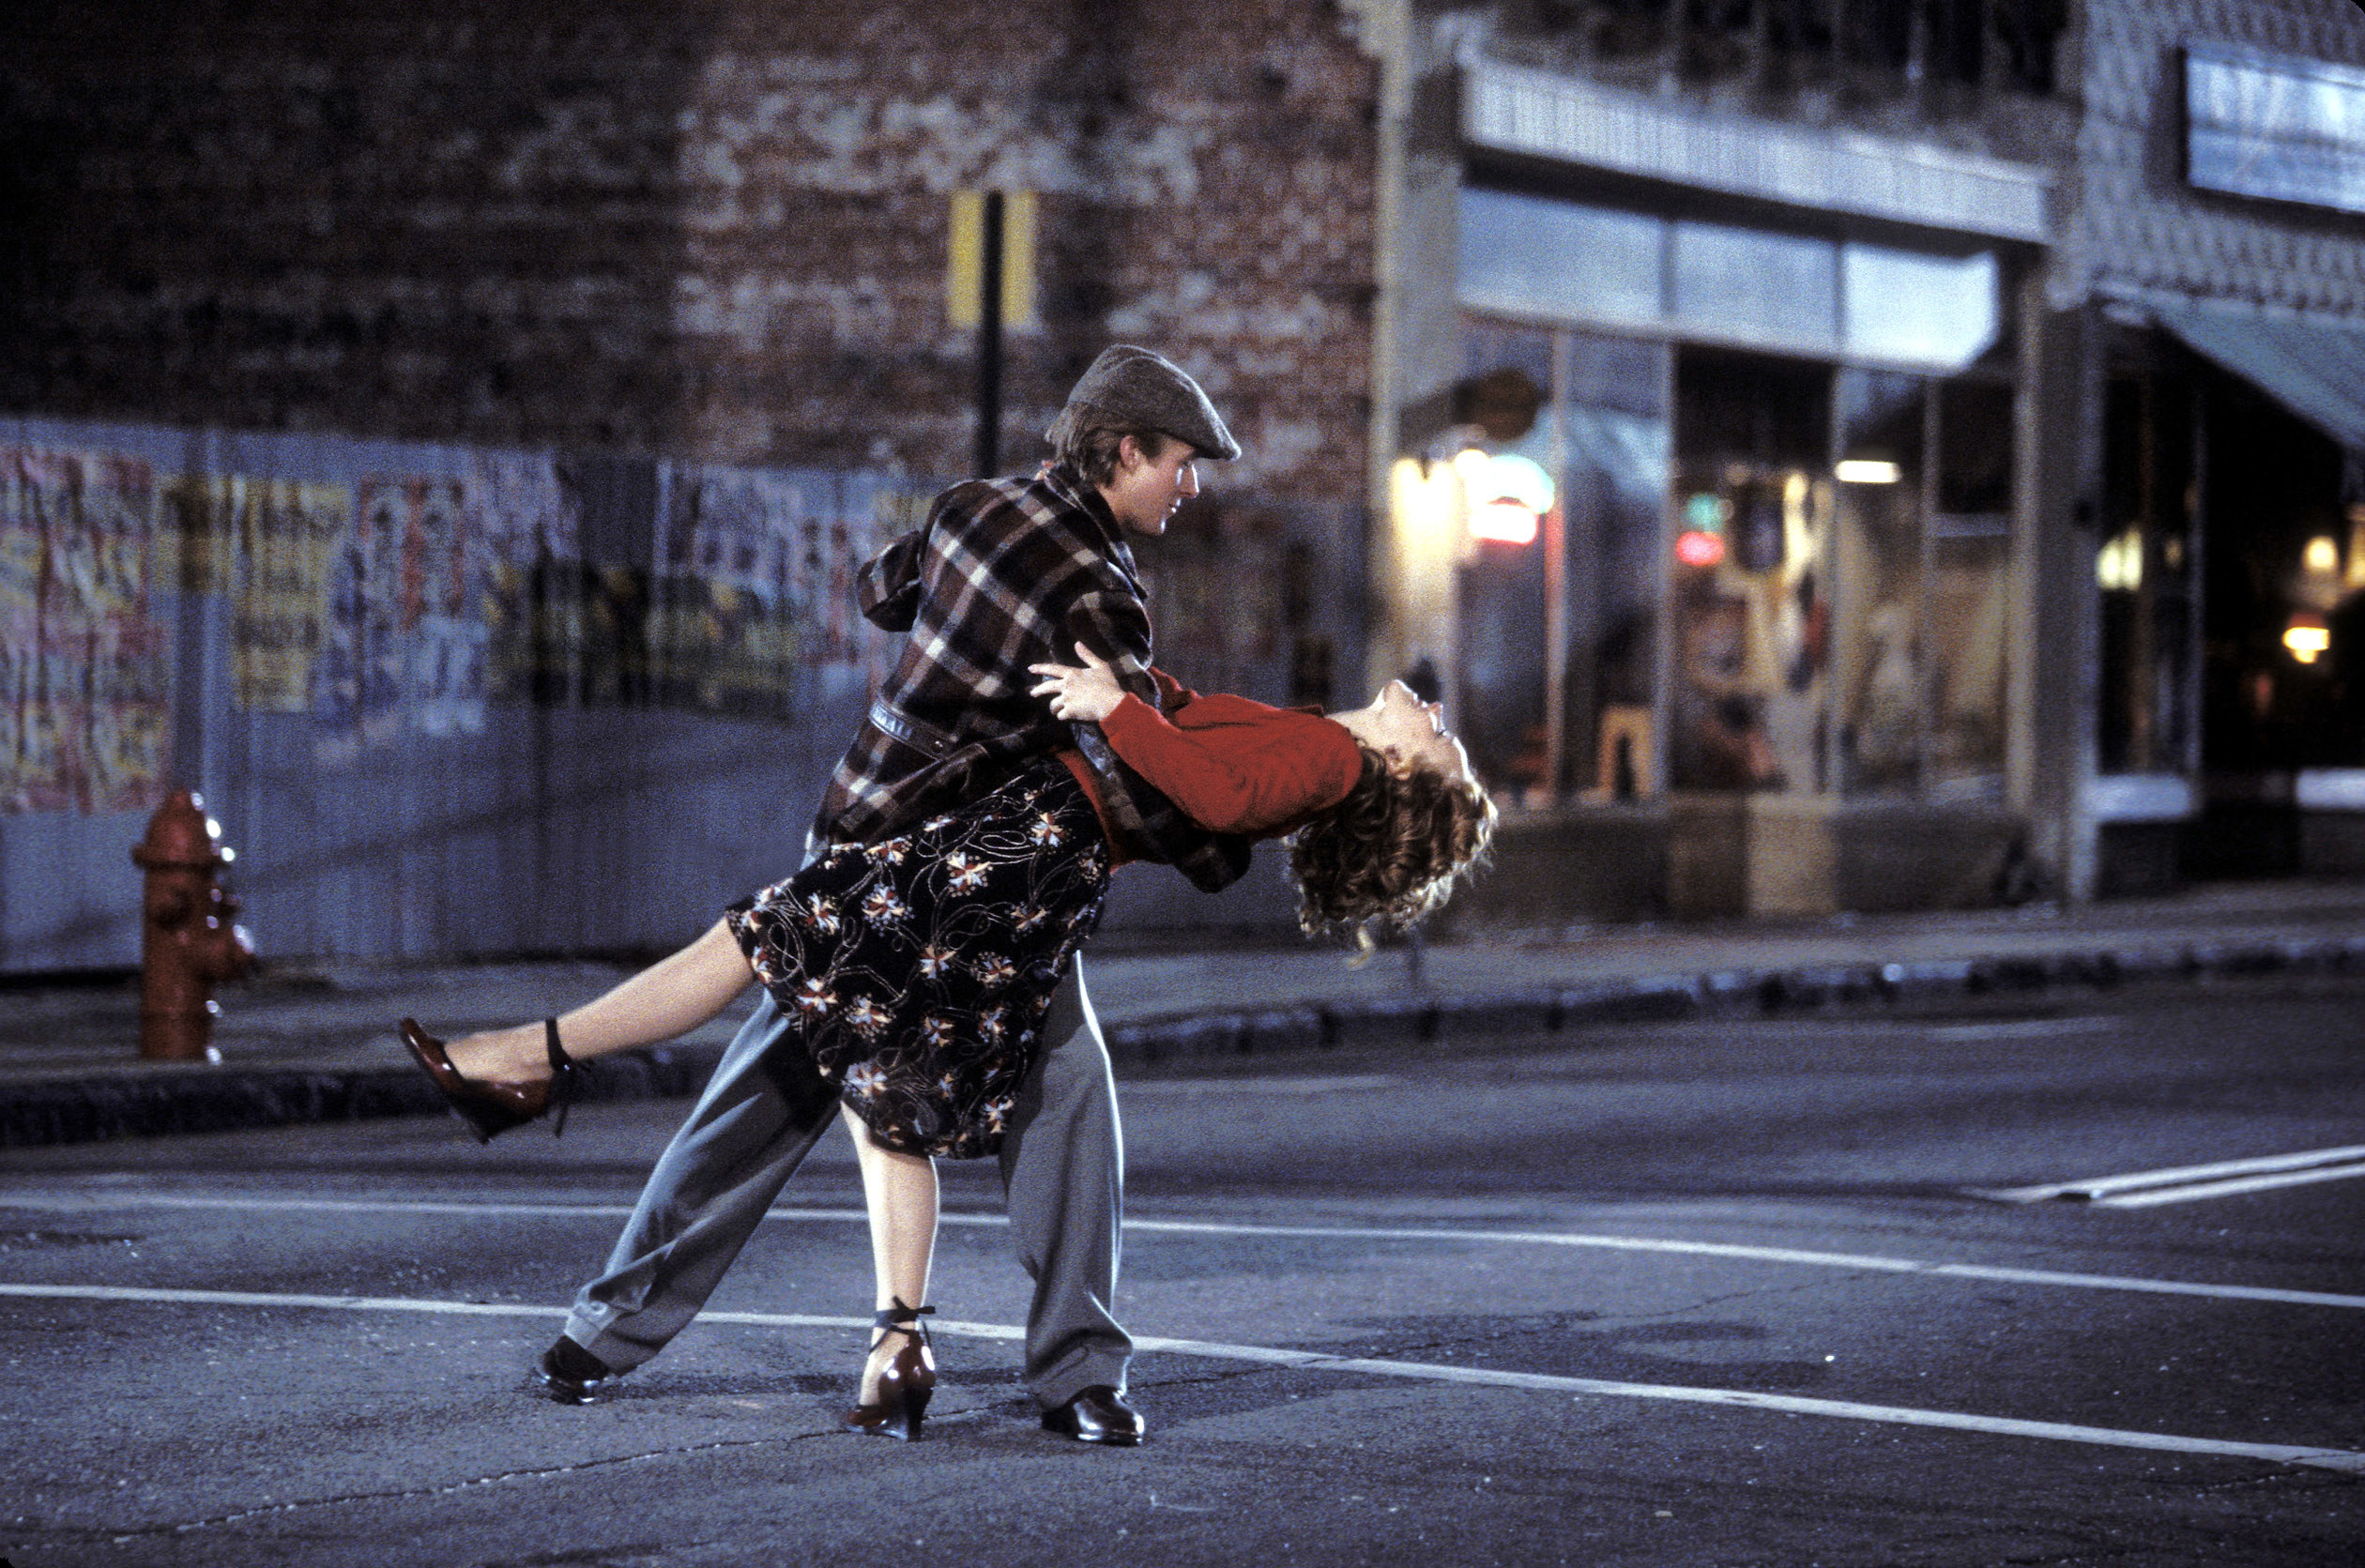 Noah dipping Allie as they dance in the middle of the street